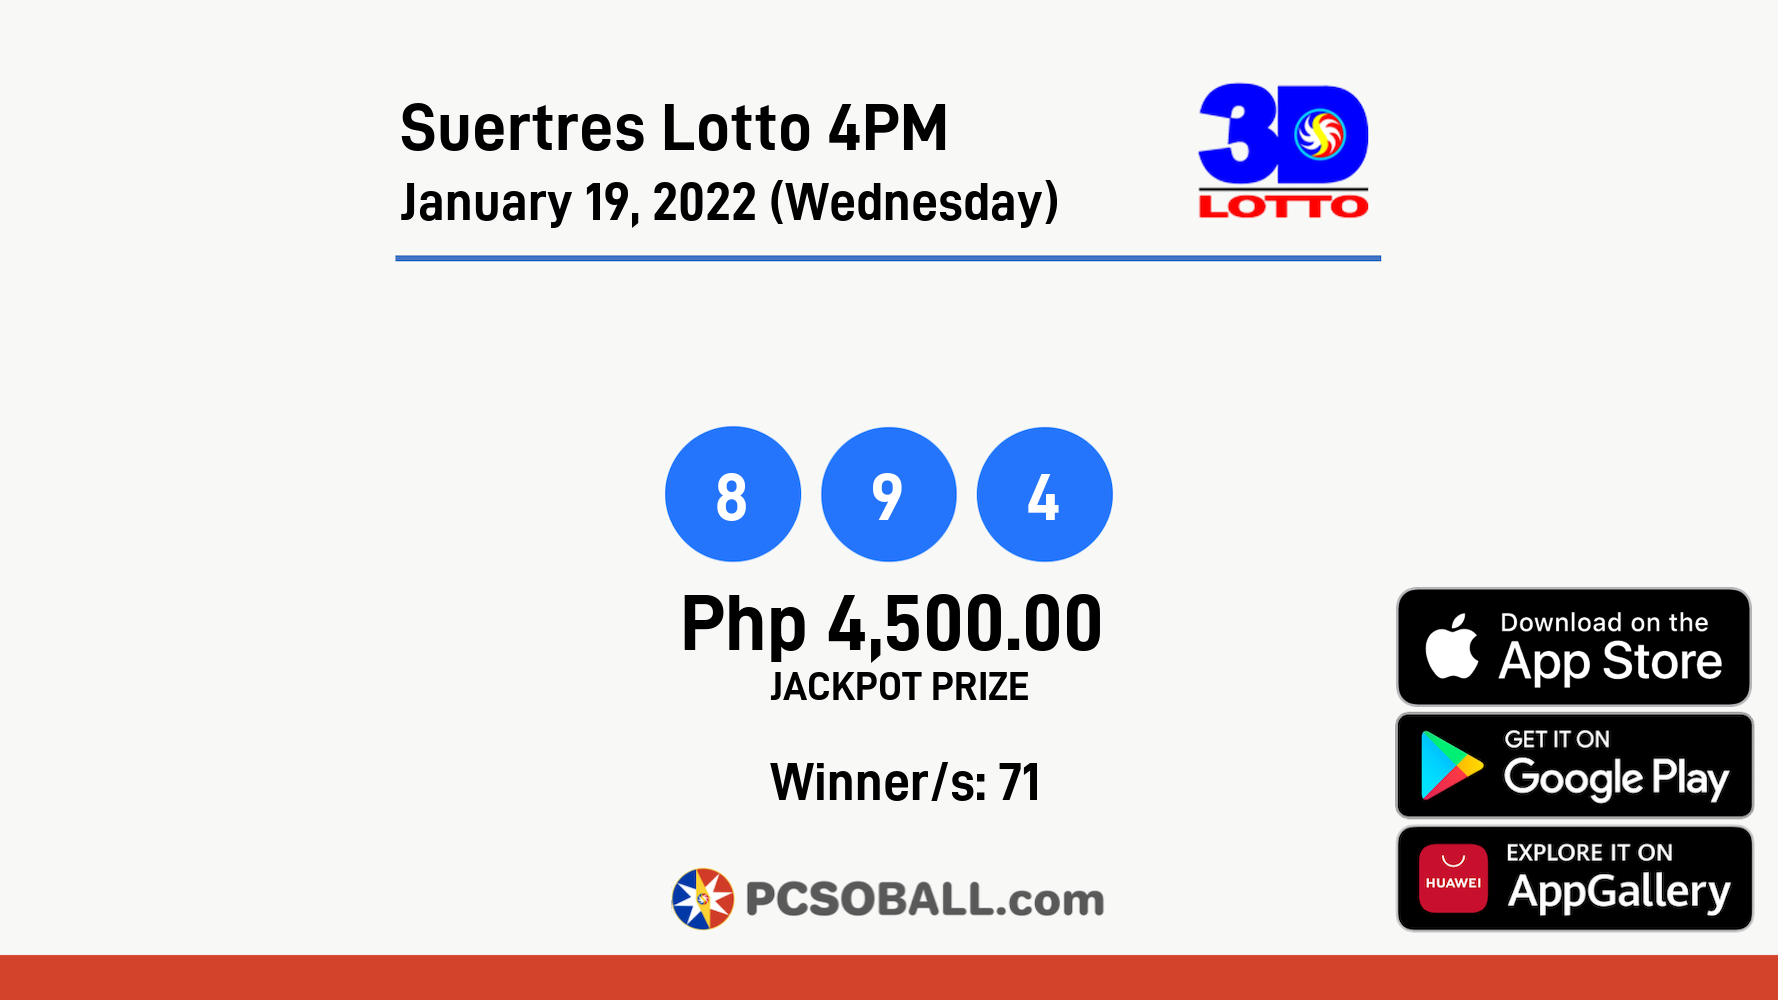 Suertres Lotto 4PM January 19, 2022 (Wednesday) Result